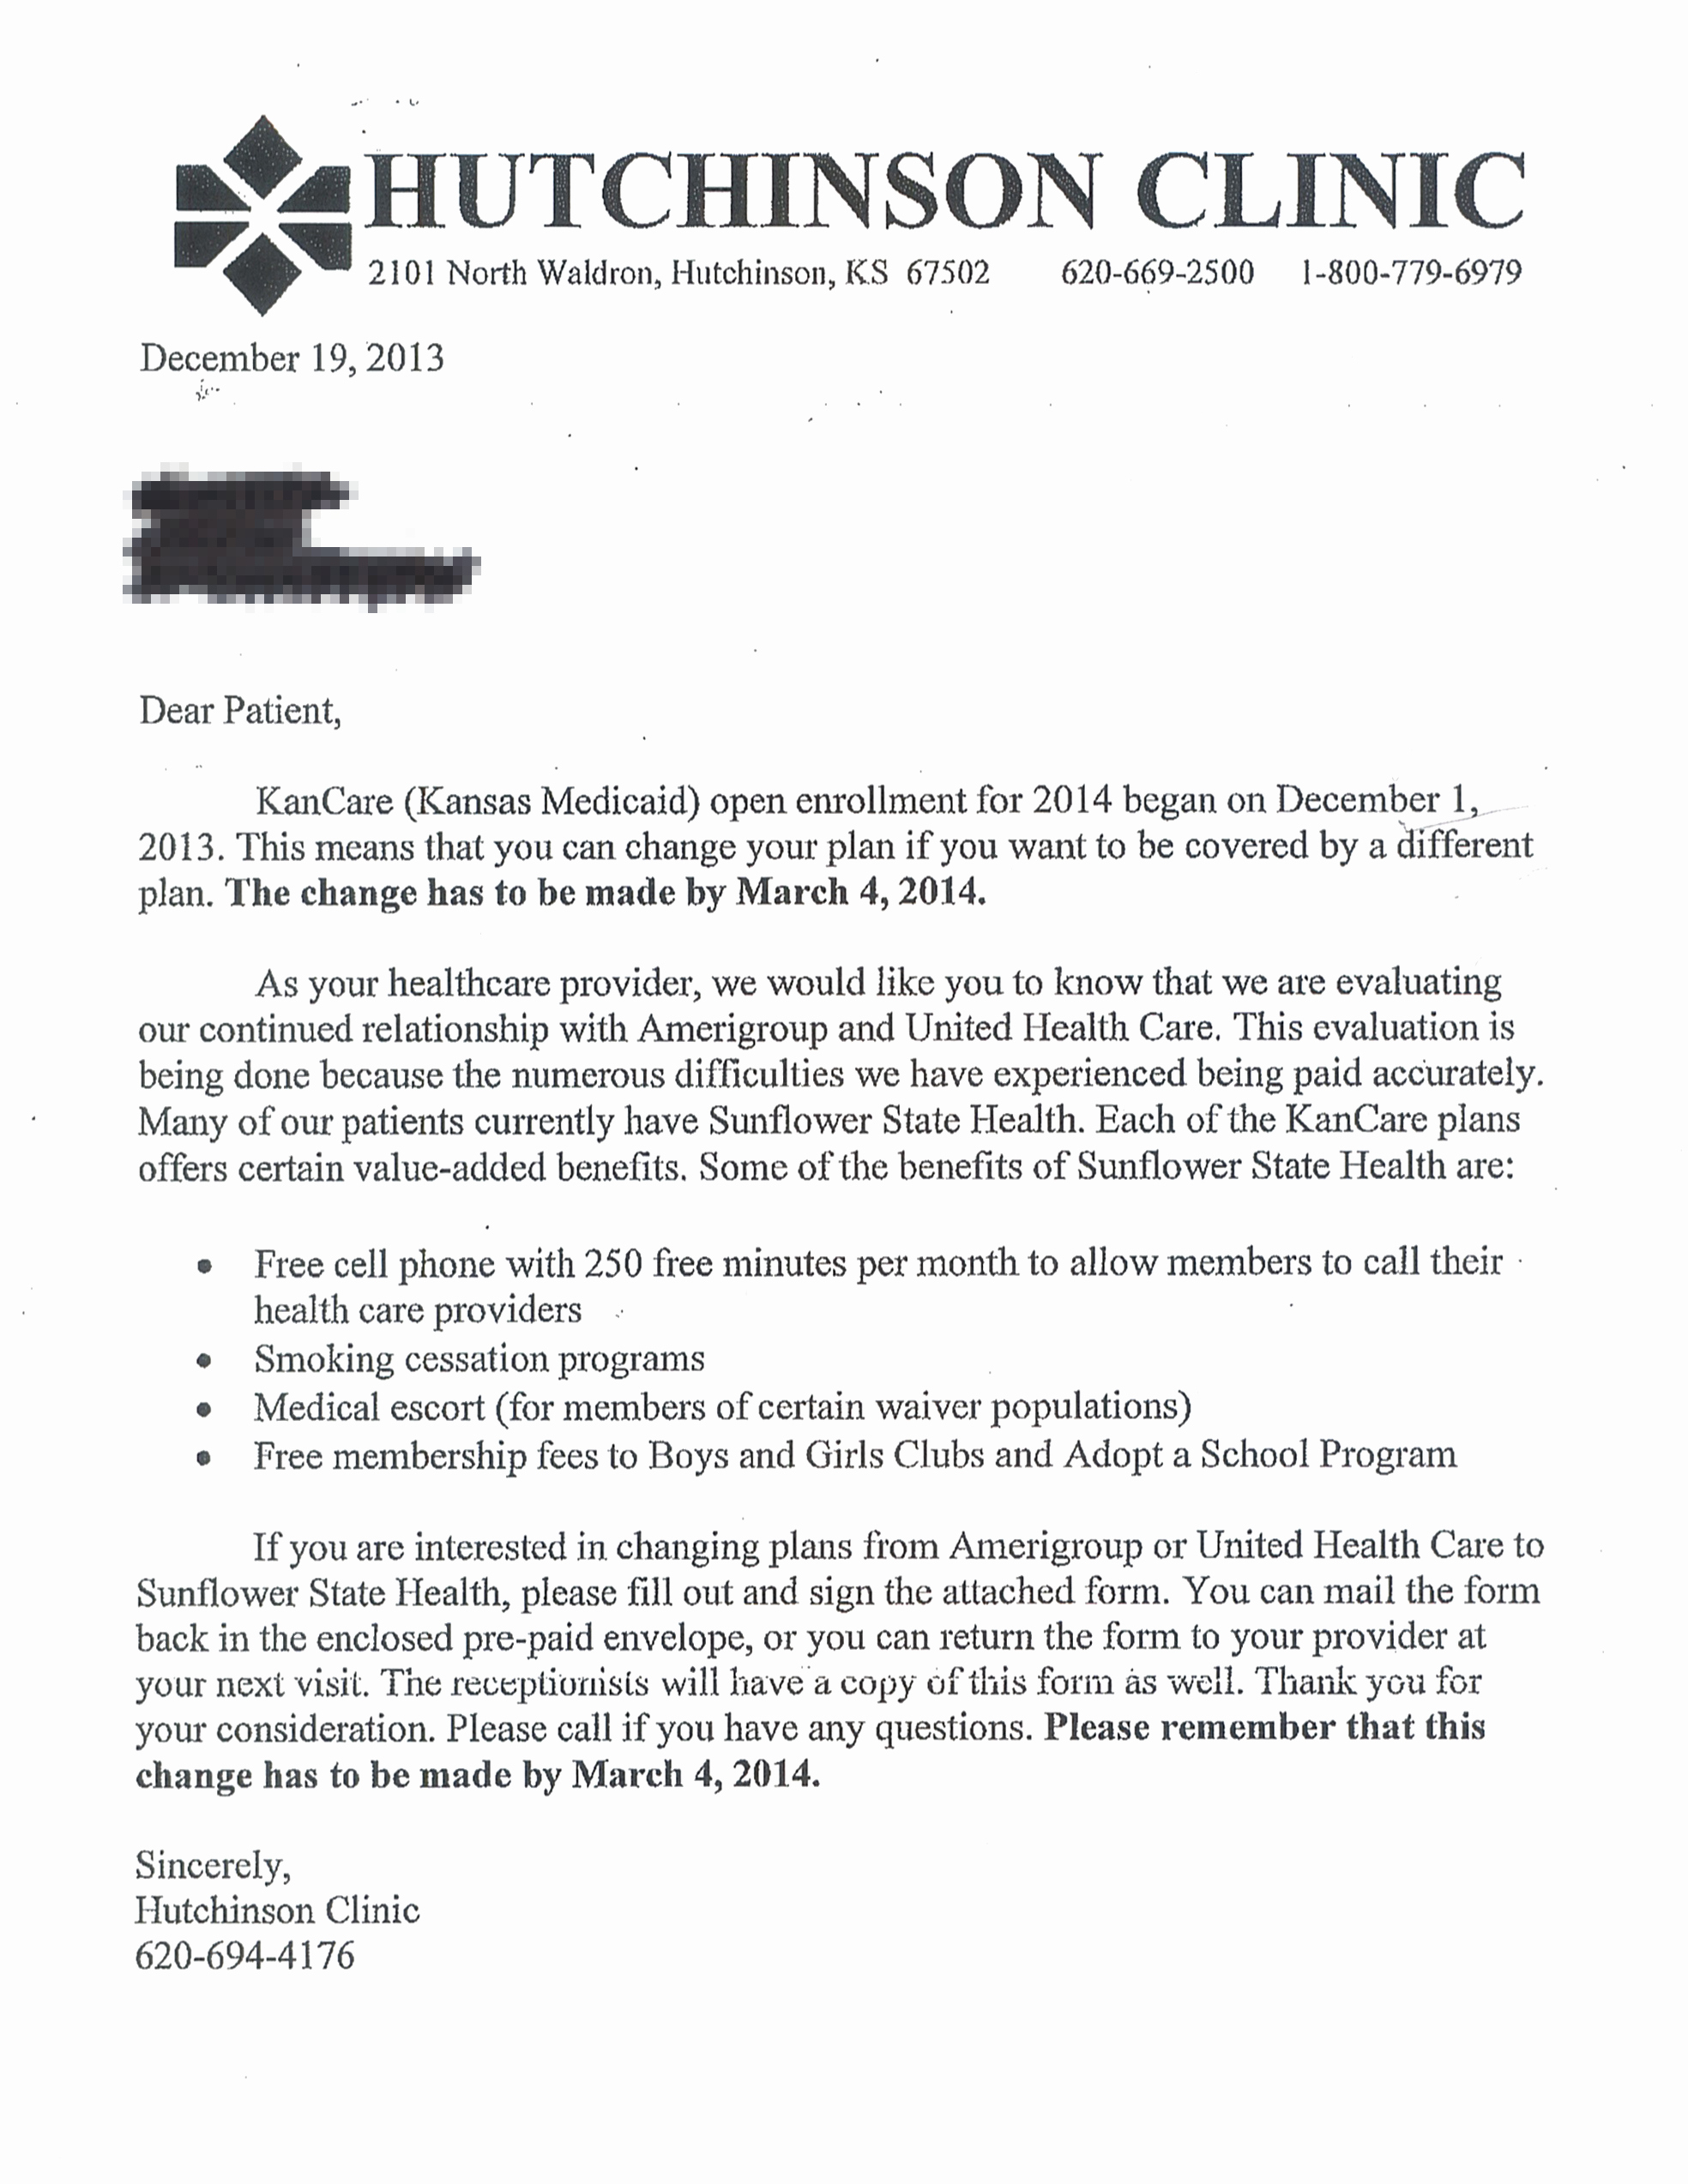 Open Enrollment Announcement Letter Best Of Hutchinson Clinic’s Letter Throws A Curve to Kancare Open